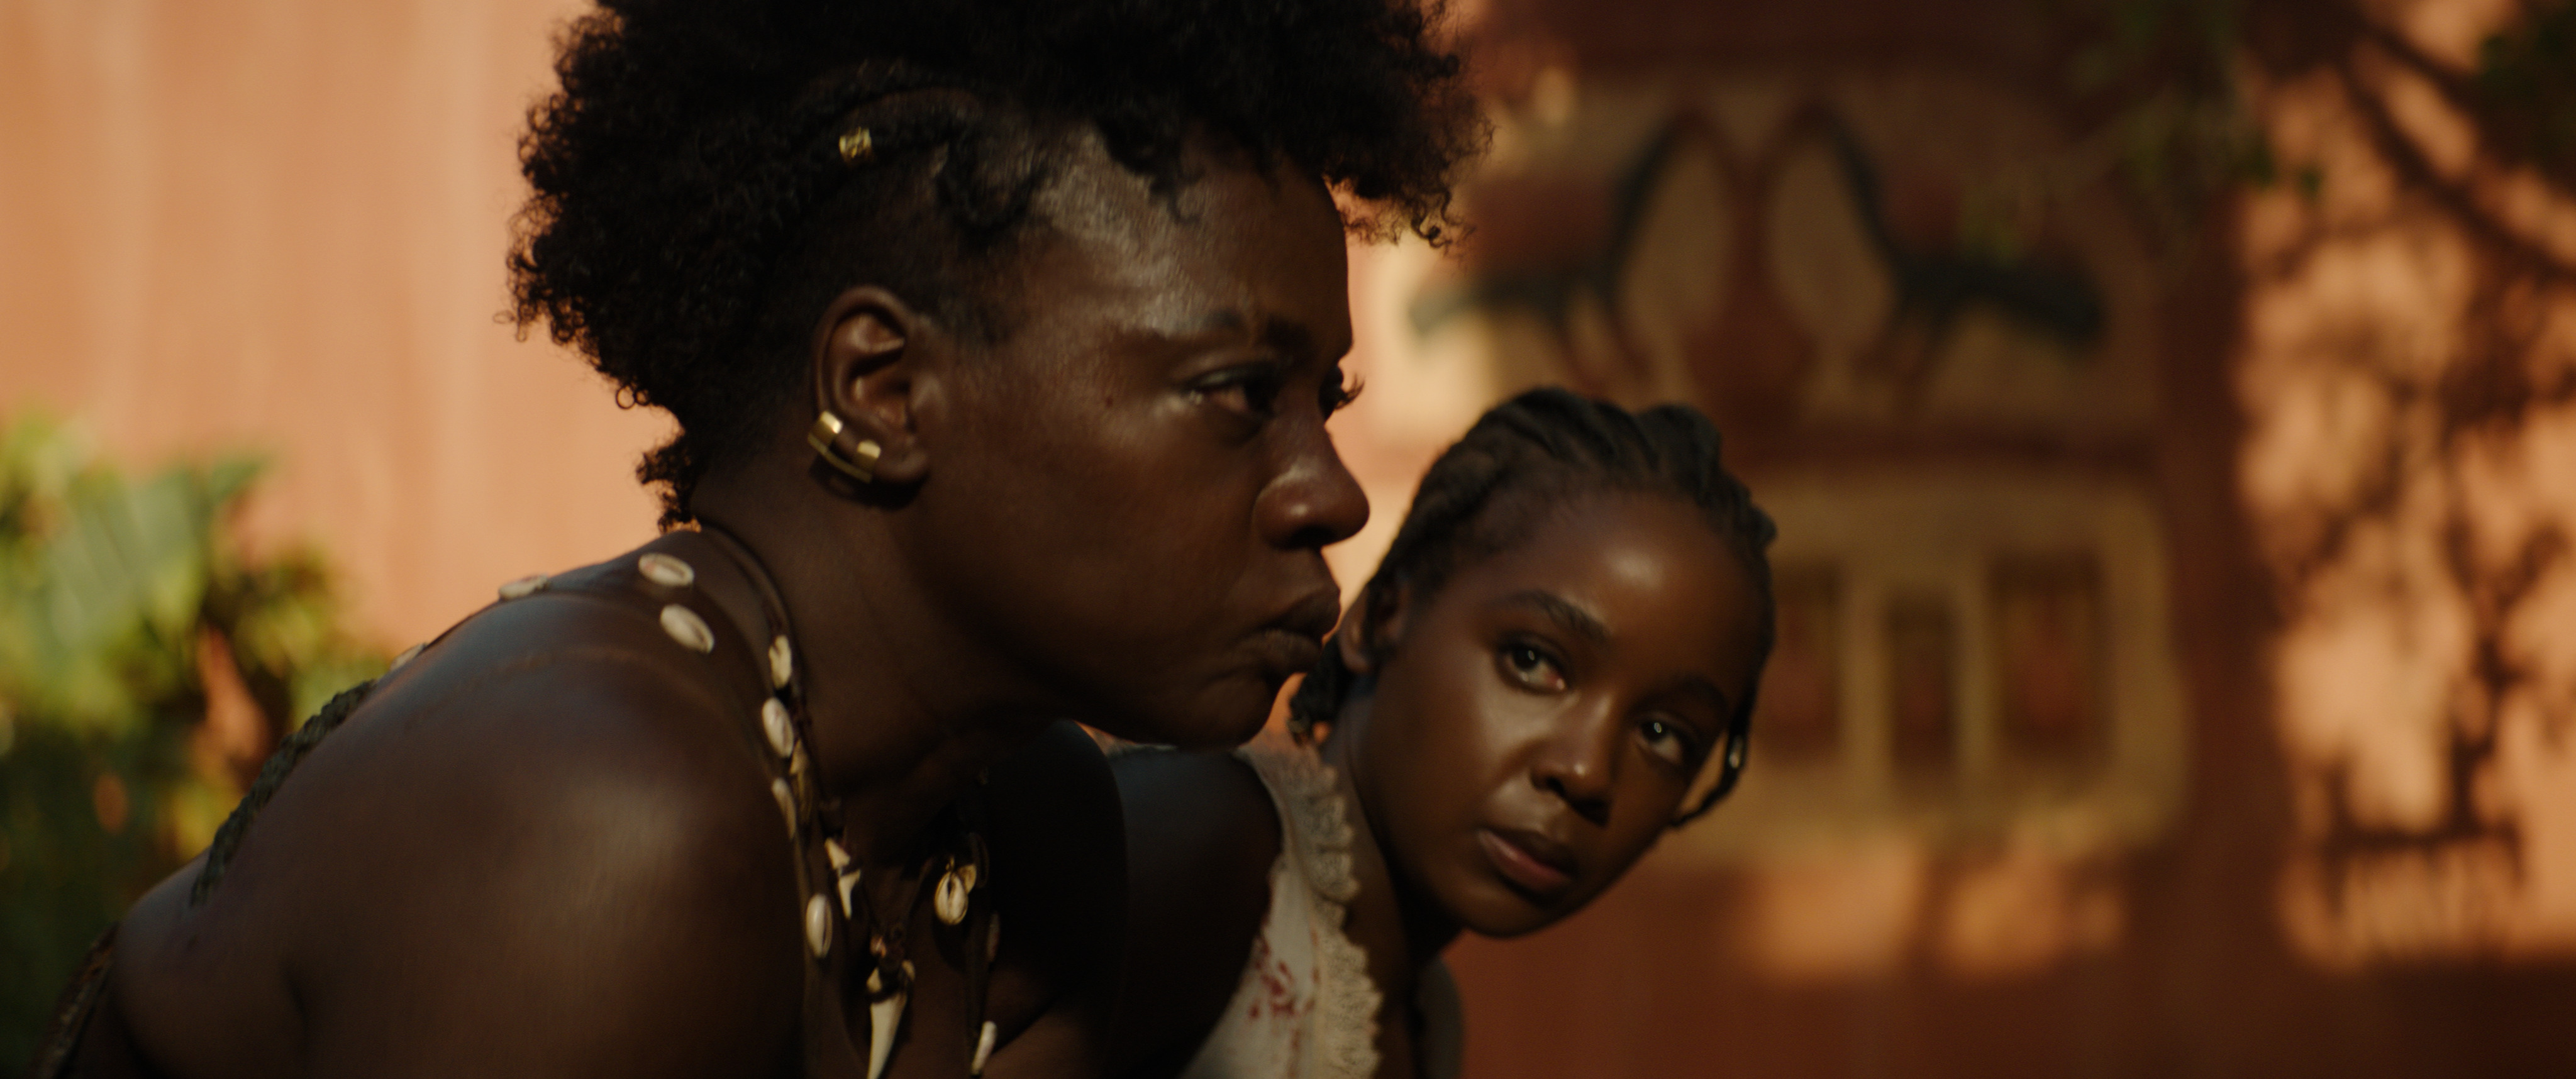 Viola Davis and Thuso Mbedu star in 'The Woman King'. Image: Supplied